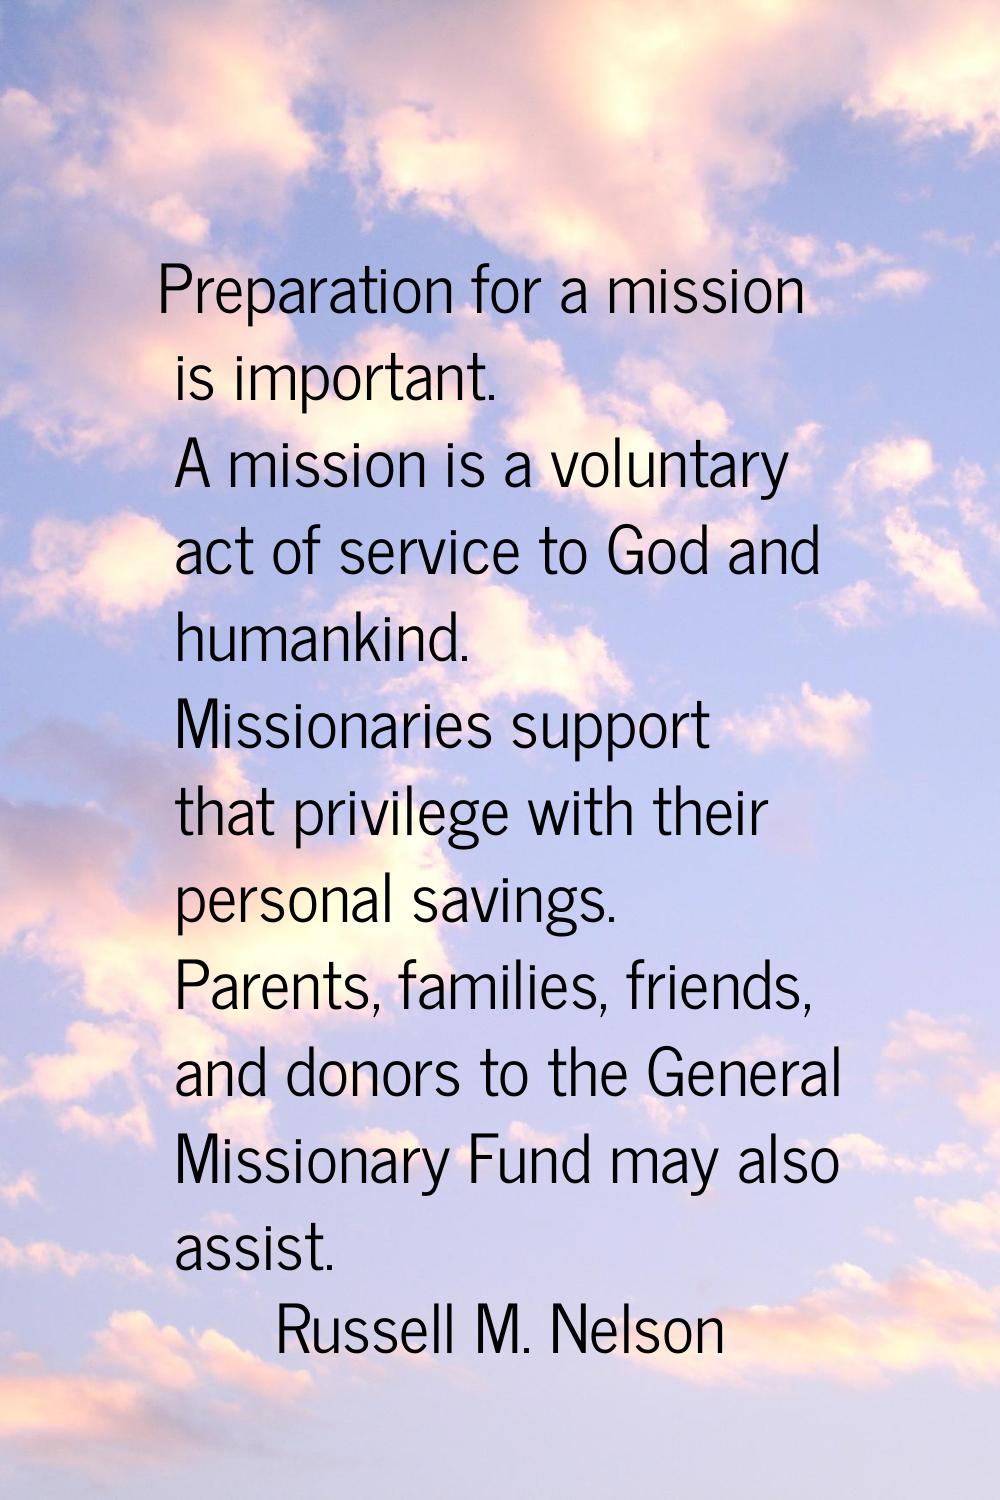 Preparation for a mission is important. A mission is a voluntary act of service to God and humankin